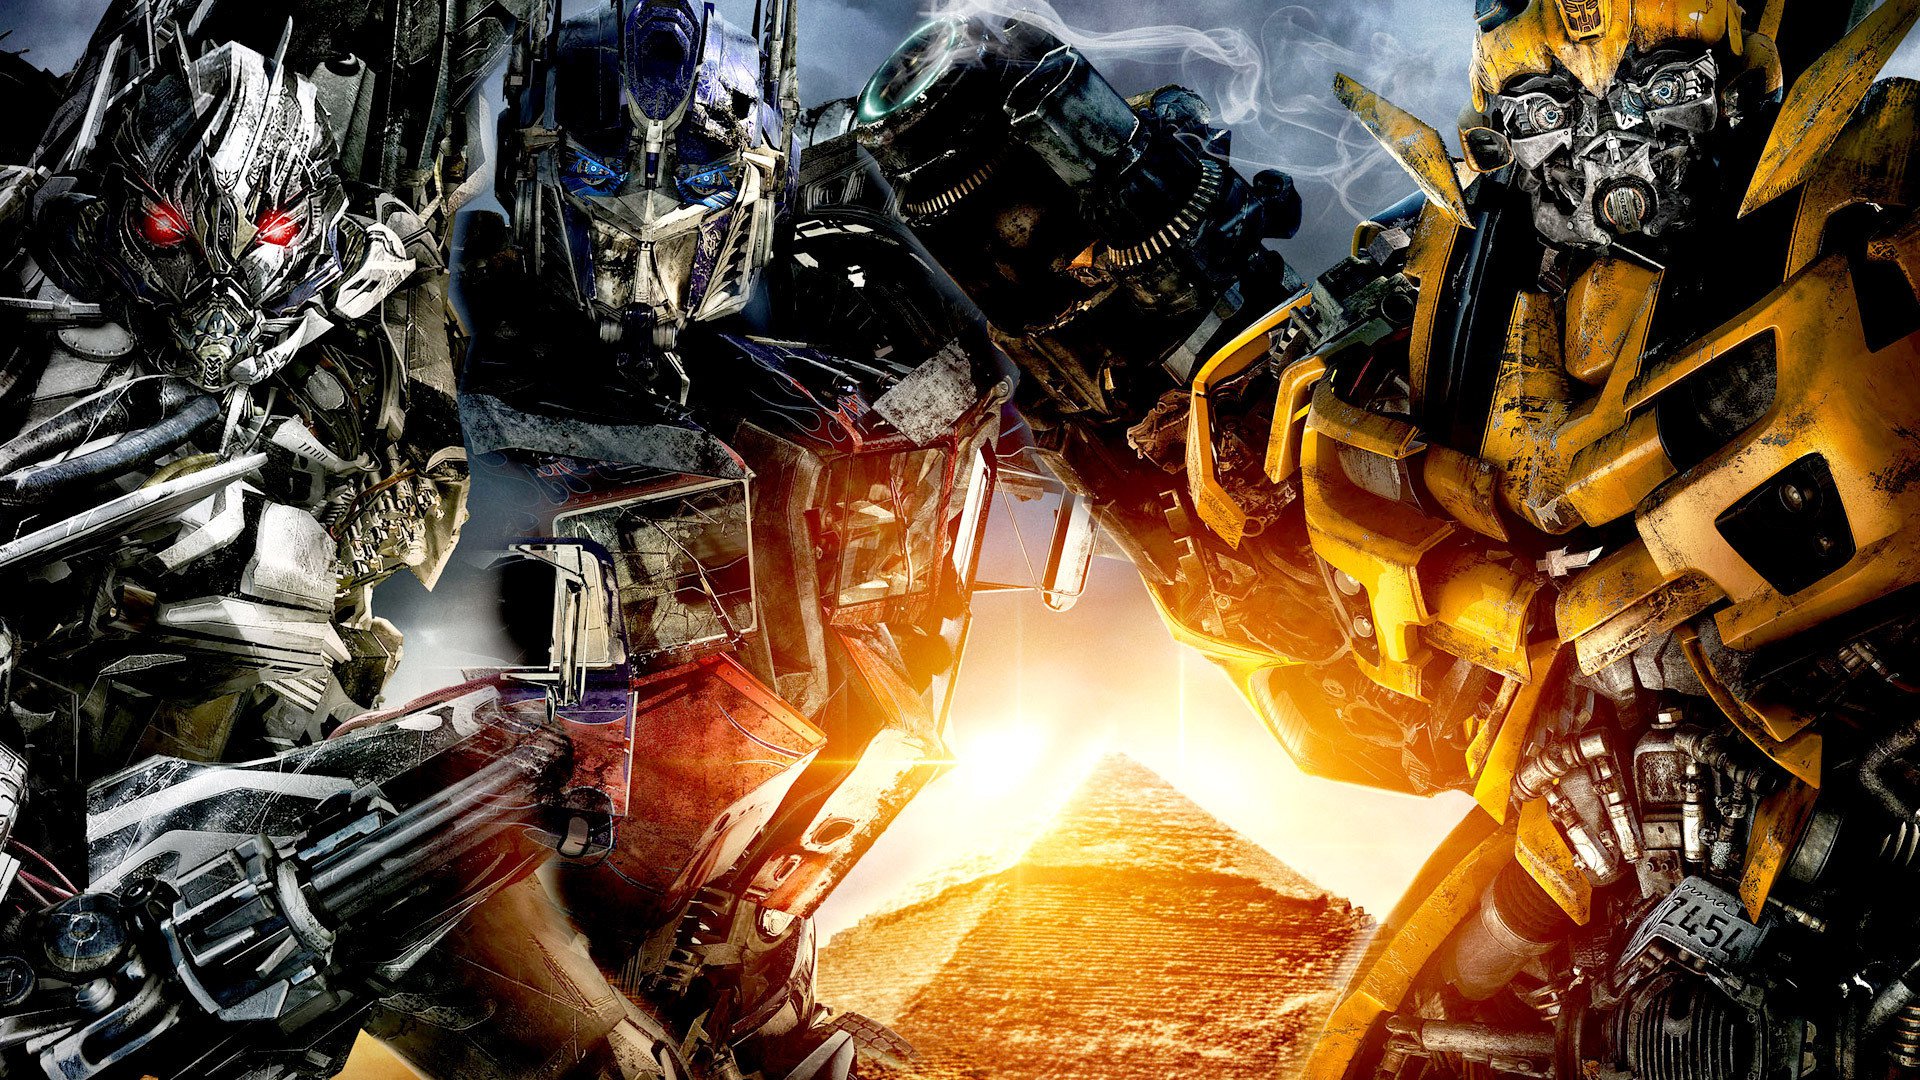 Transformers: Revenge of the Fallen download the last version for windows